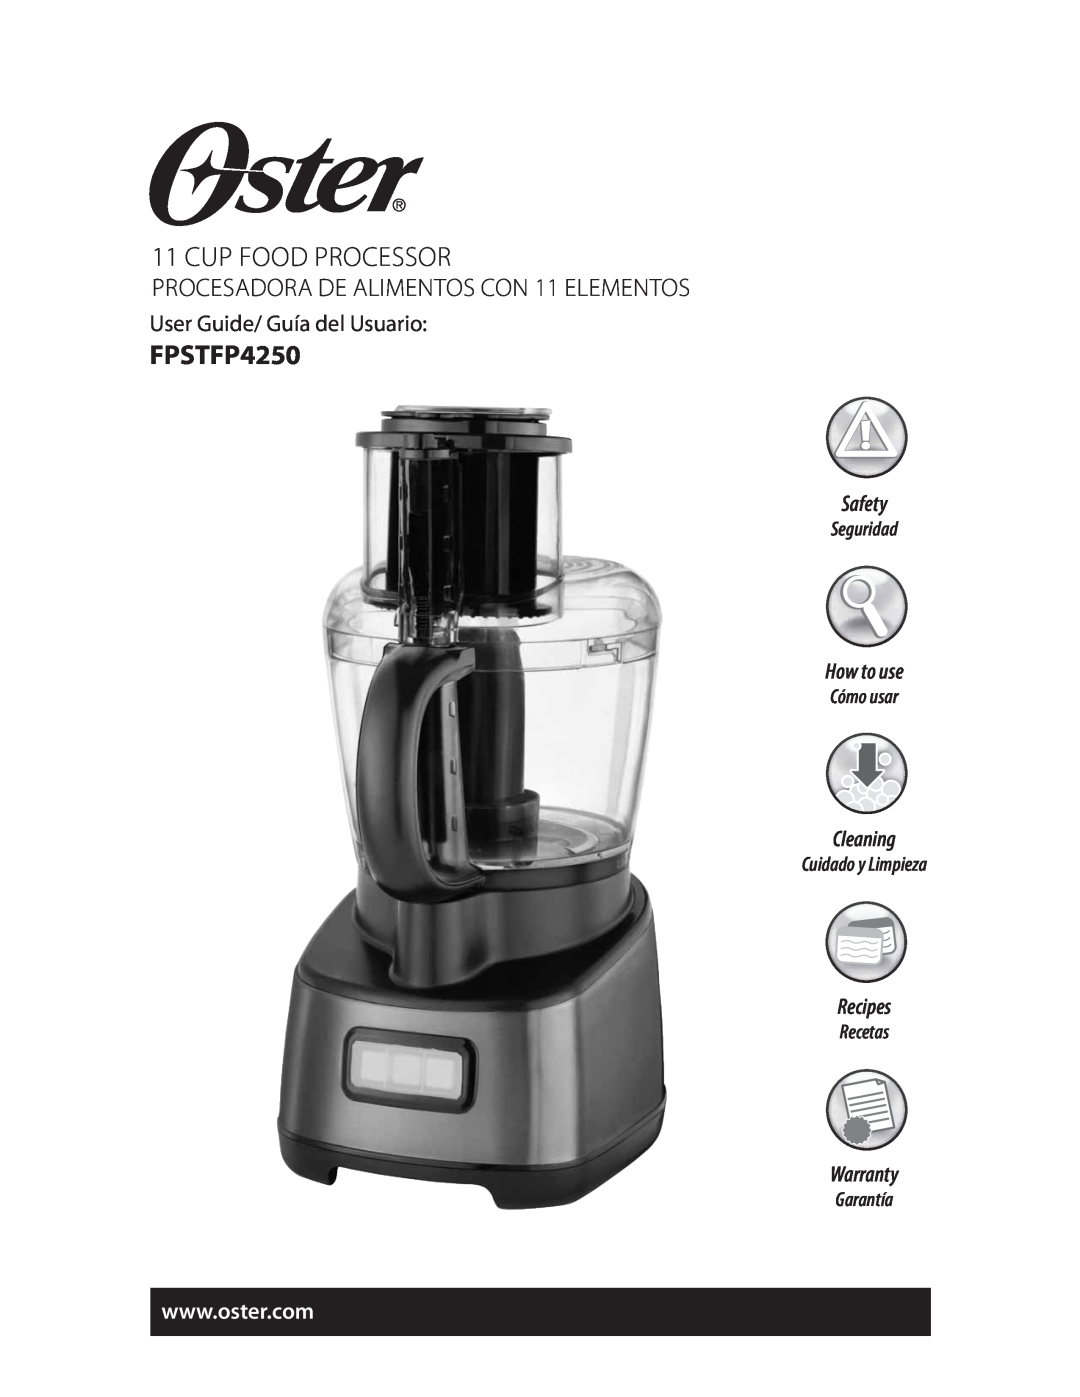 Oster FPSTFP4250 warranty Cup Food Processor, Safety, How to use, Cleaning, Recipes, Warranty, Seguridad, Cómo usar 